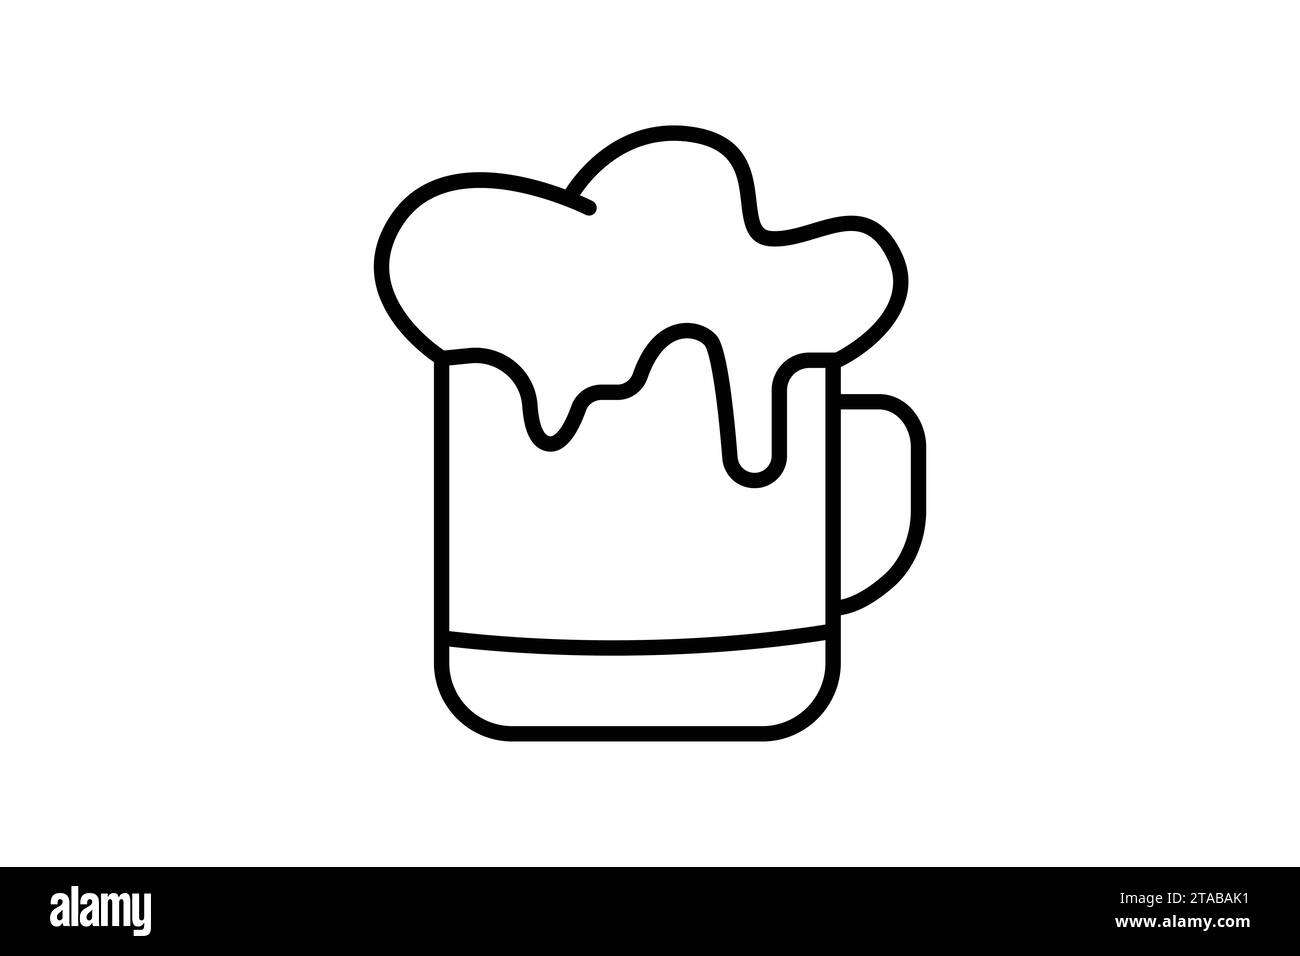 beer mug icon. icon related to party a beer or Oktoberfest-themed party. line icon style. simple vector design editable Stock Vector